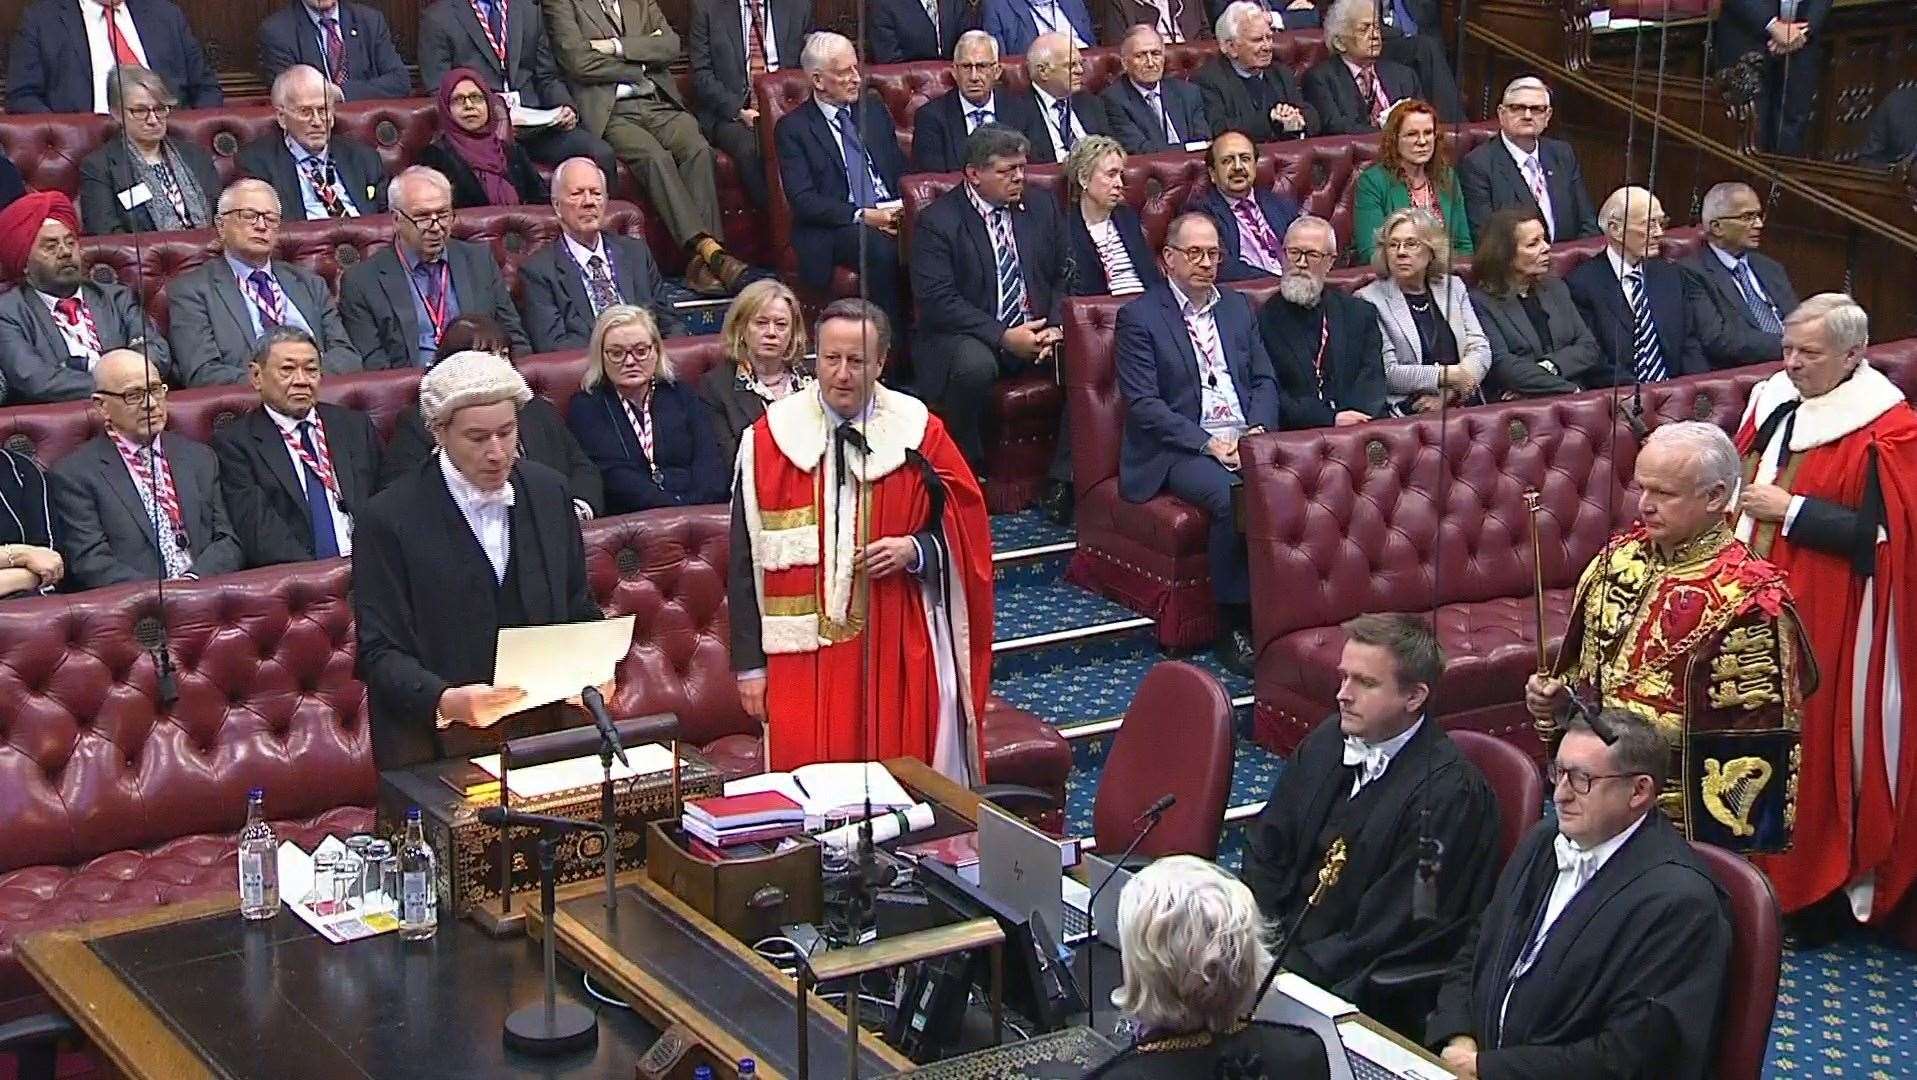 Lord Cameron wore the traditional scarlet robes for the short ceremony (House of Lords/UK Parliament/PA)